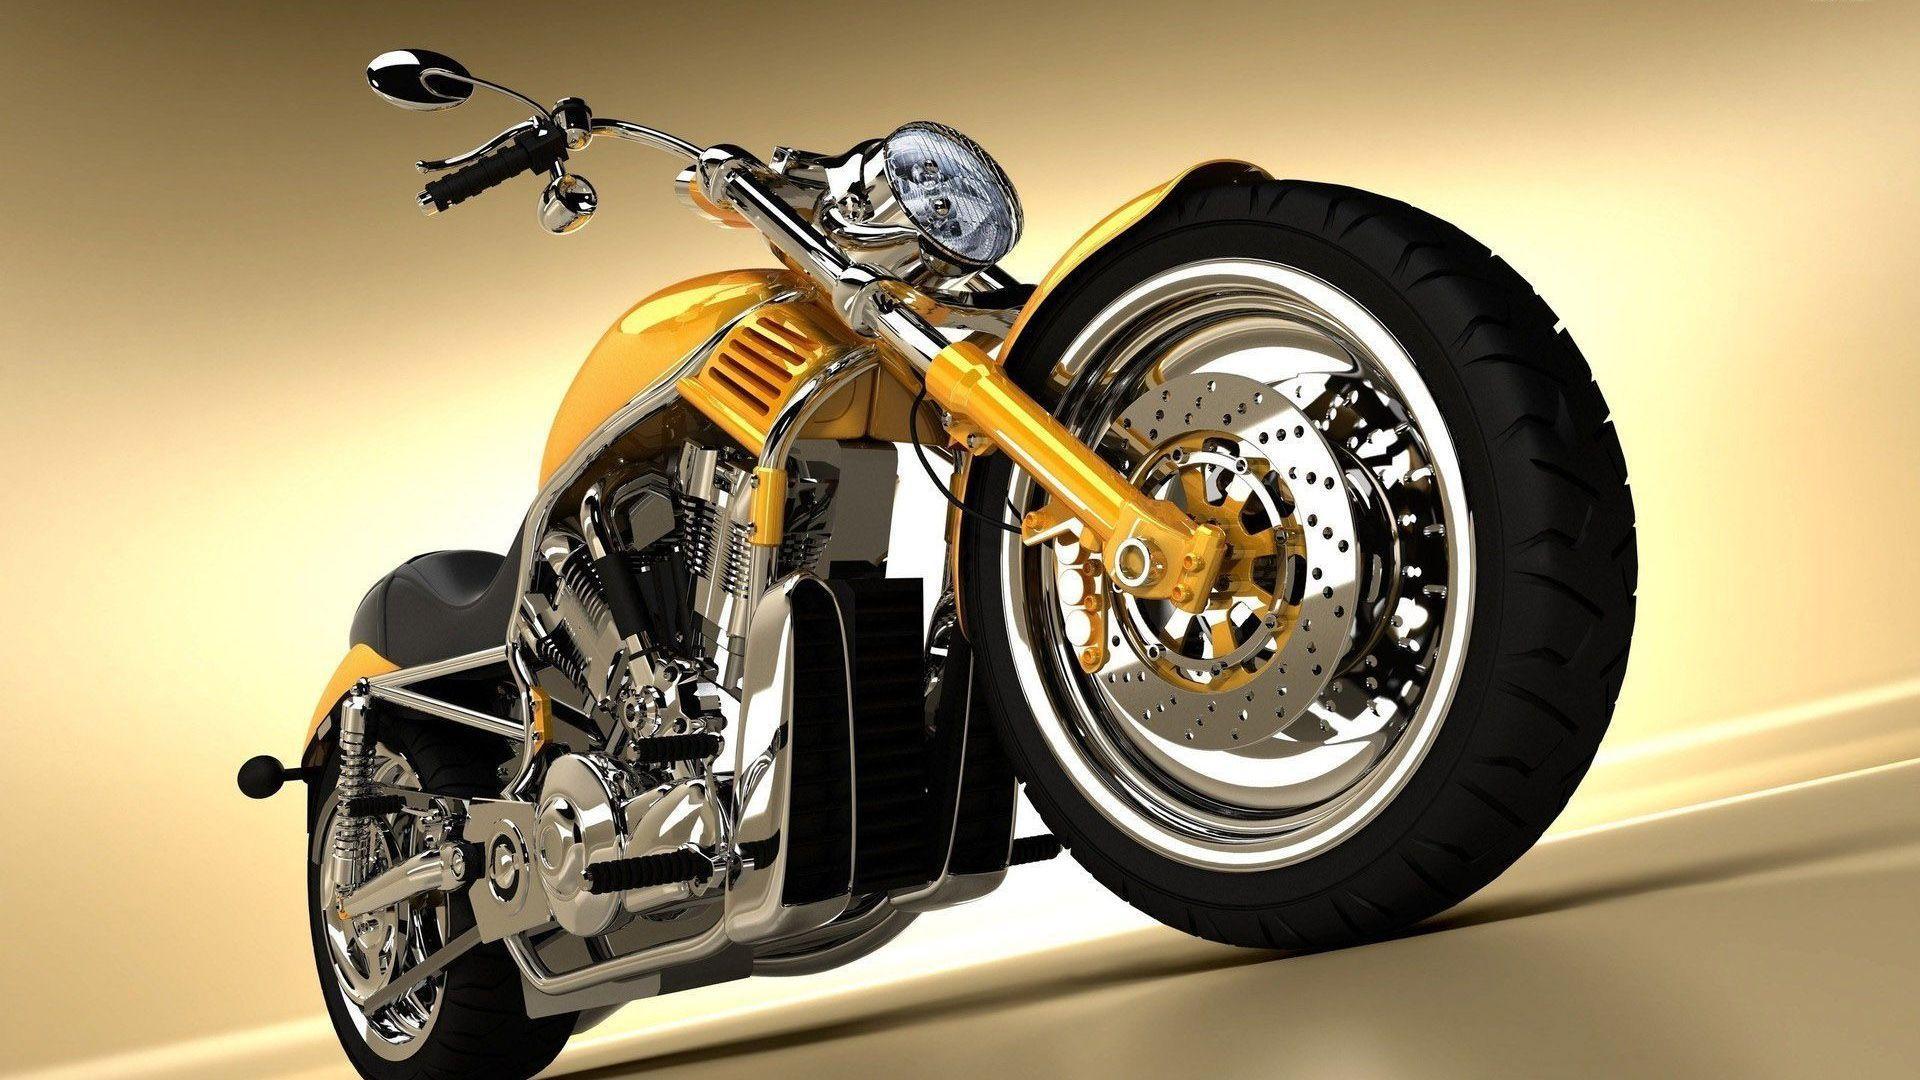 Motorcycle Yellow Harley Wallpaper Style Motorcycle